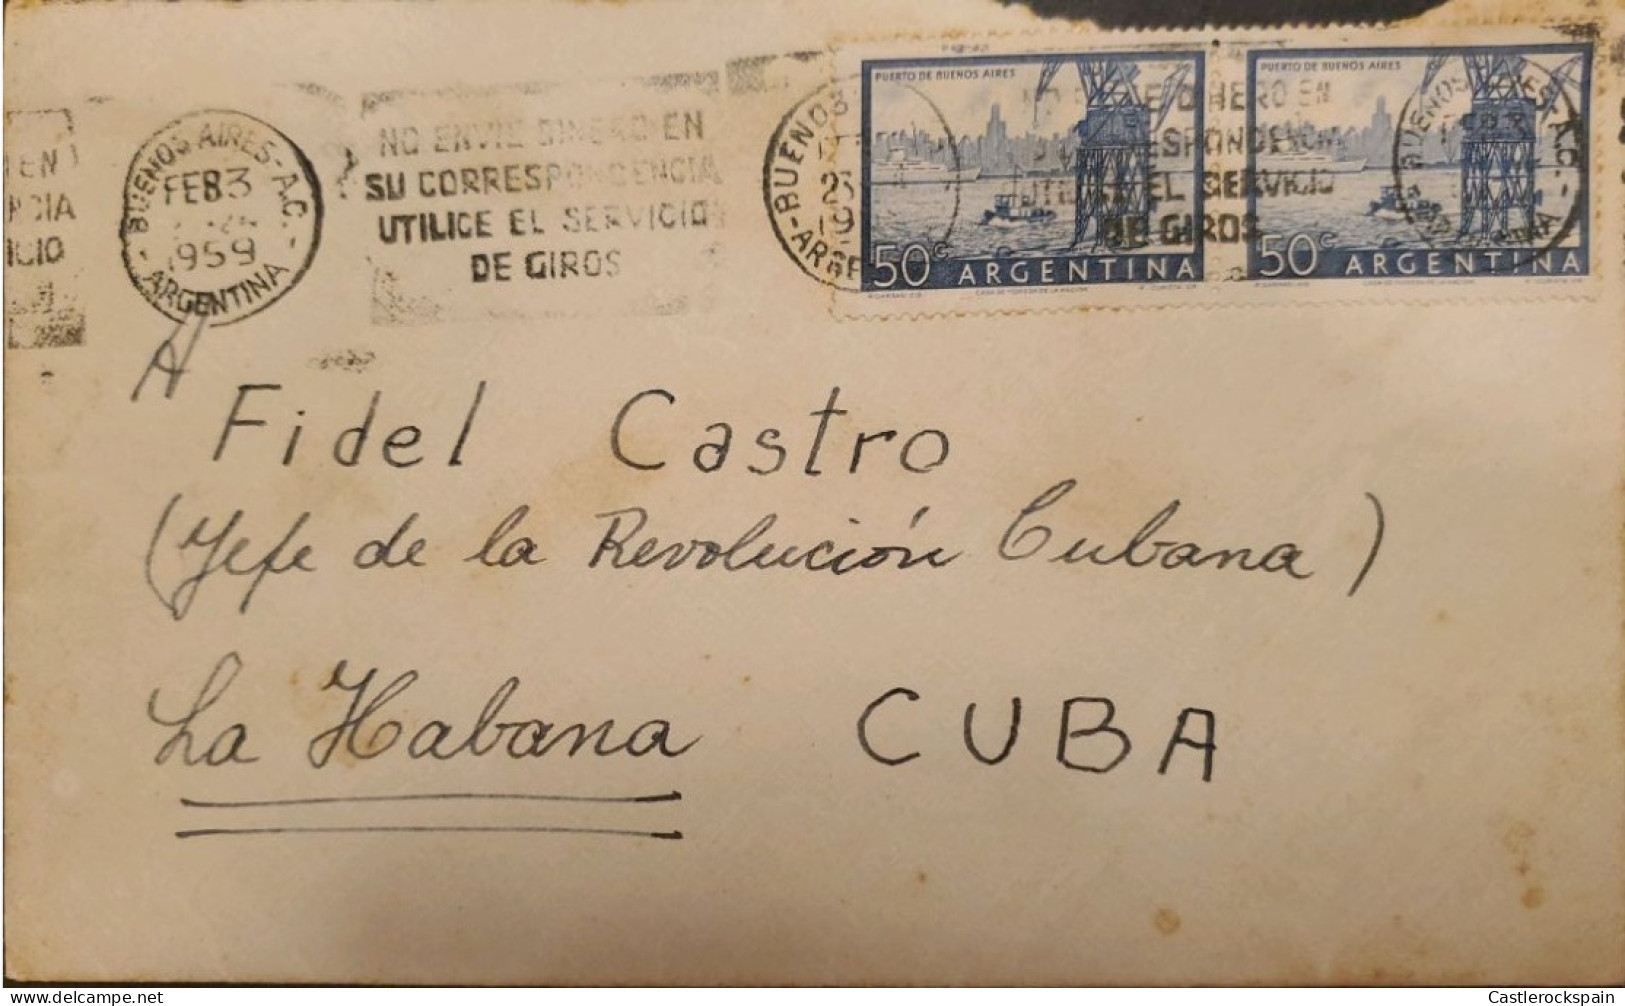 MI) 1959, ARGENTINA, FROM BUENOS AIRES TO HAVANA, FIDEL CASTRO, WITH CANCELLATION SLOGAN DO NOT SEND MONEY IN YOUR CORRE - Usados